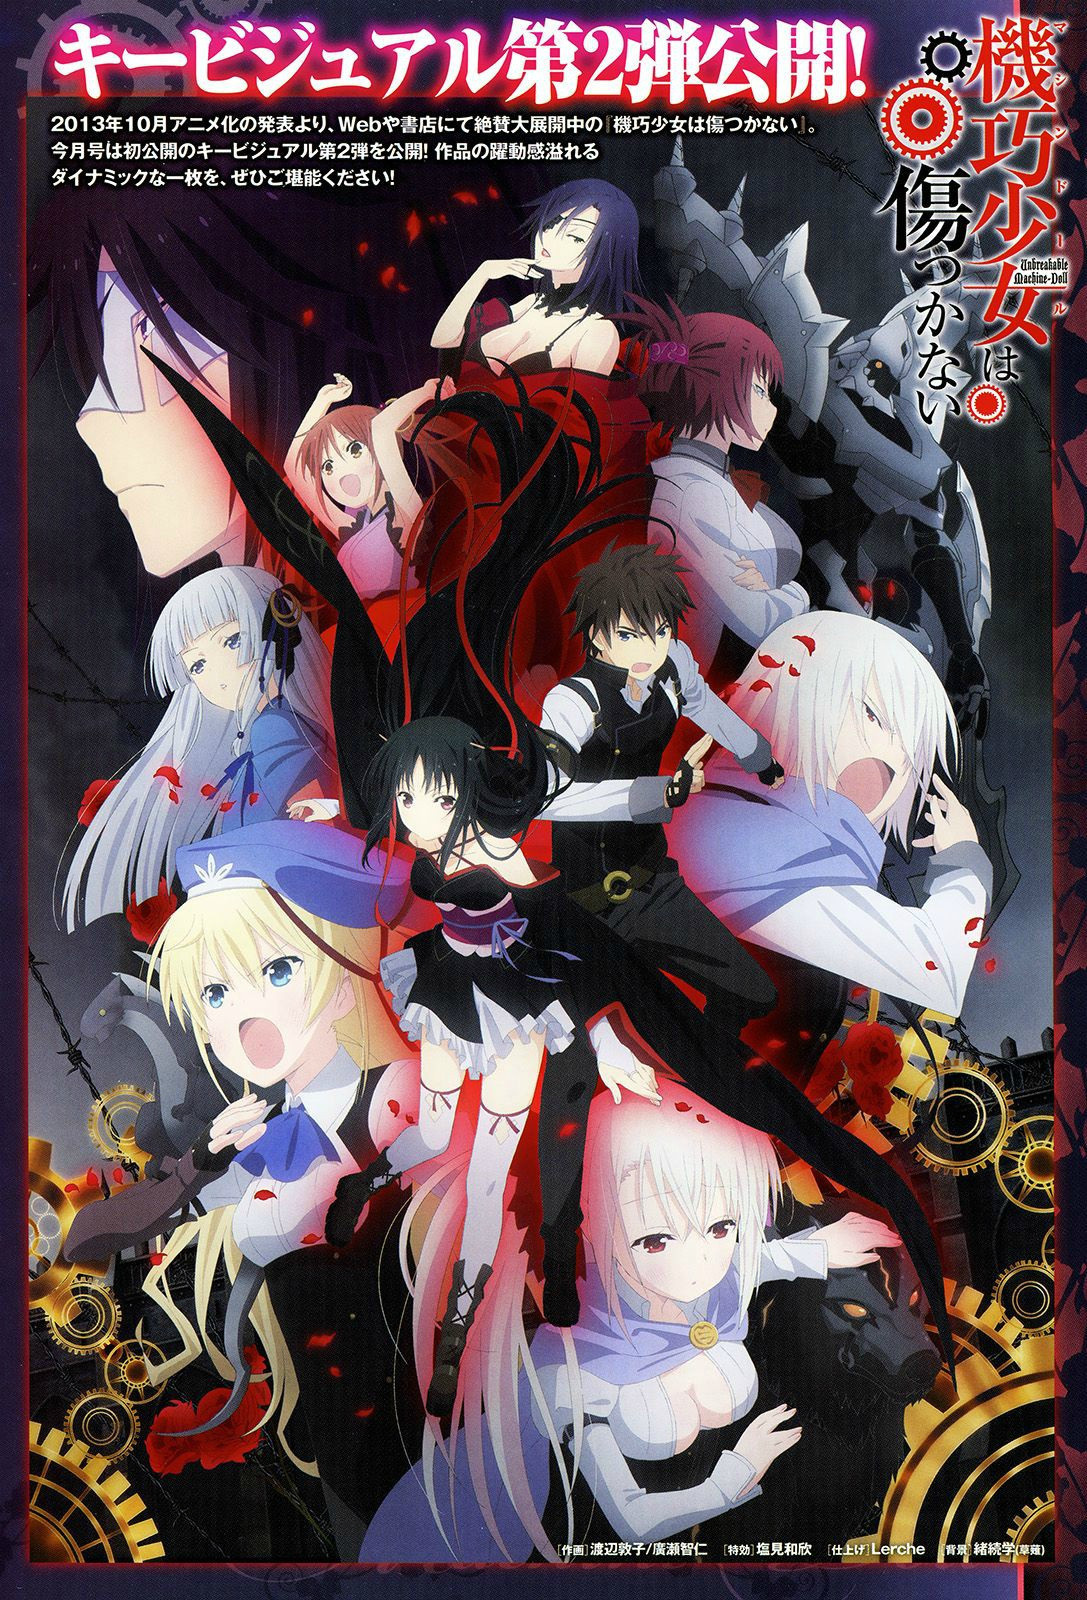 Unbreakable Machine-doll OST - The (not so) Personal Blog of an Otaku